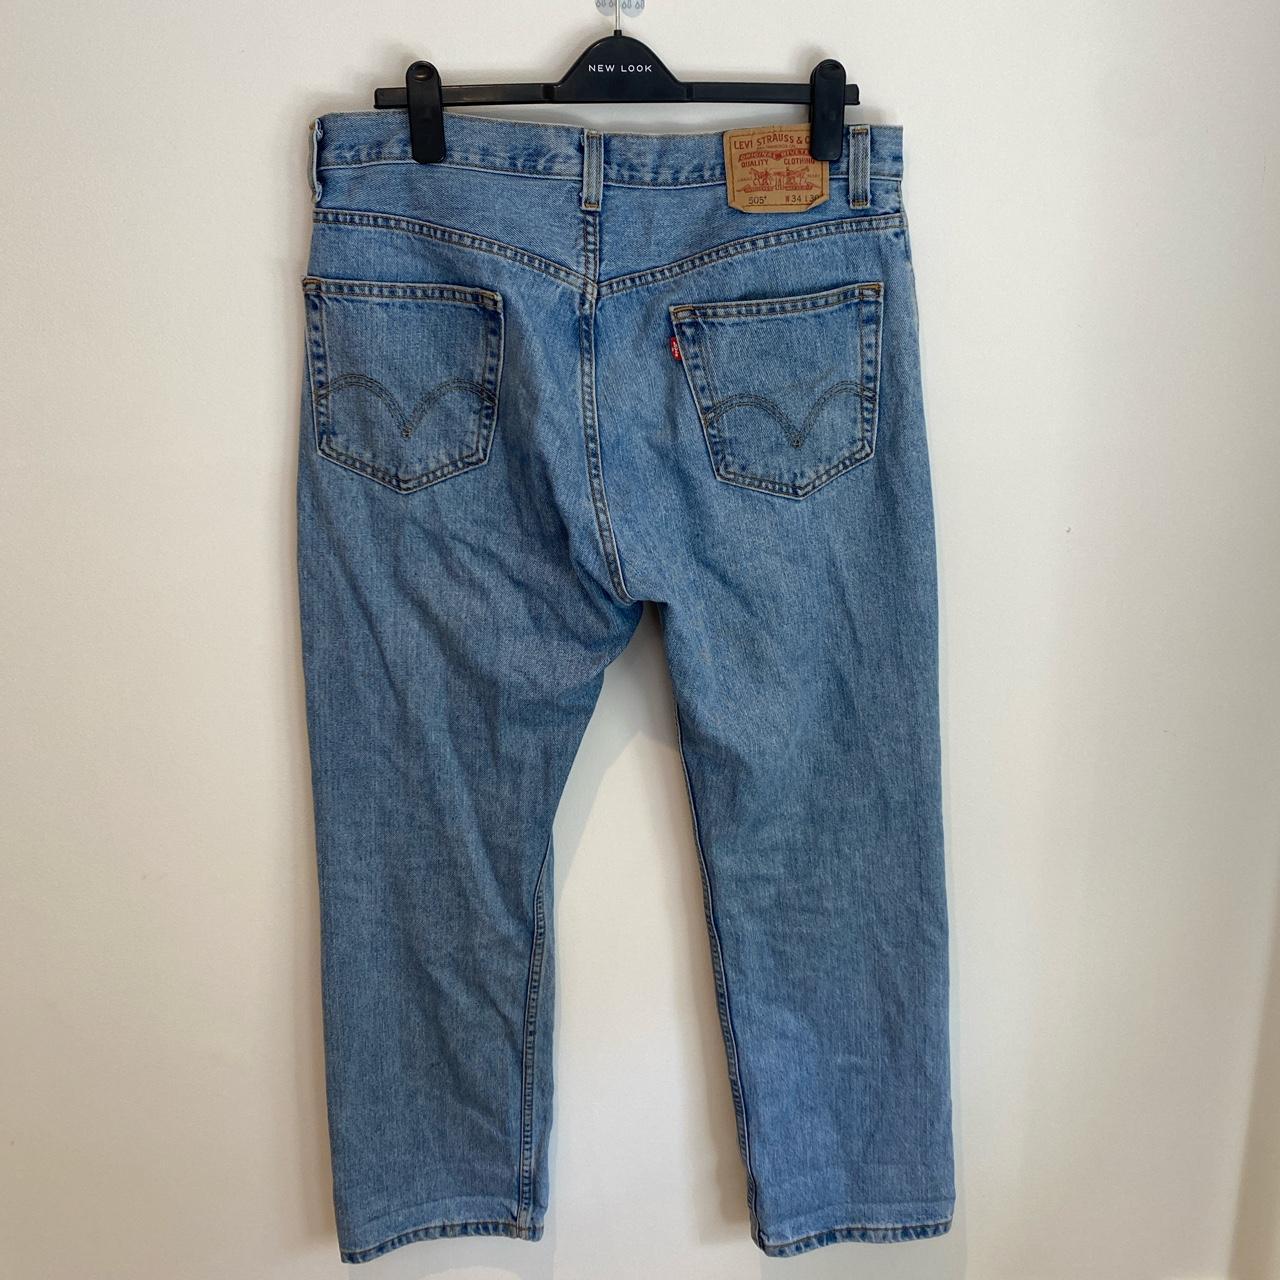 Levi’s 505 relaxed fit in good condition but have a... - Depop